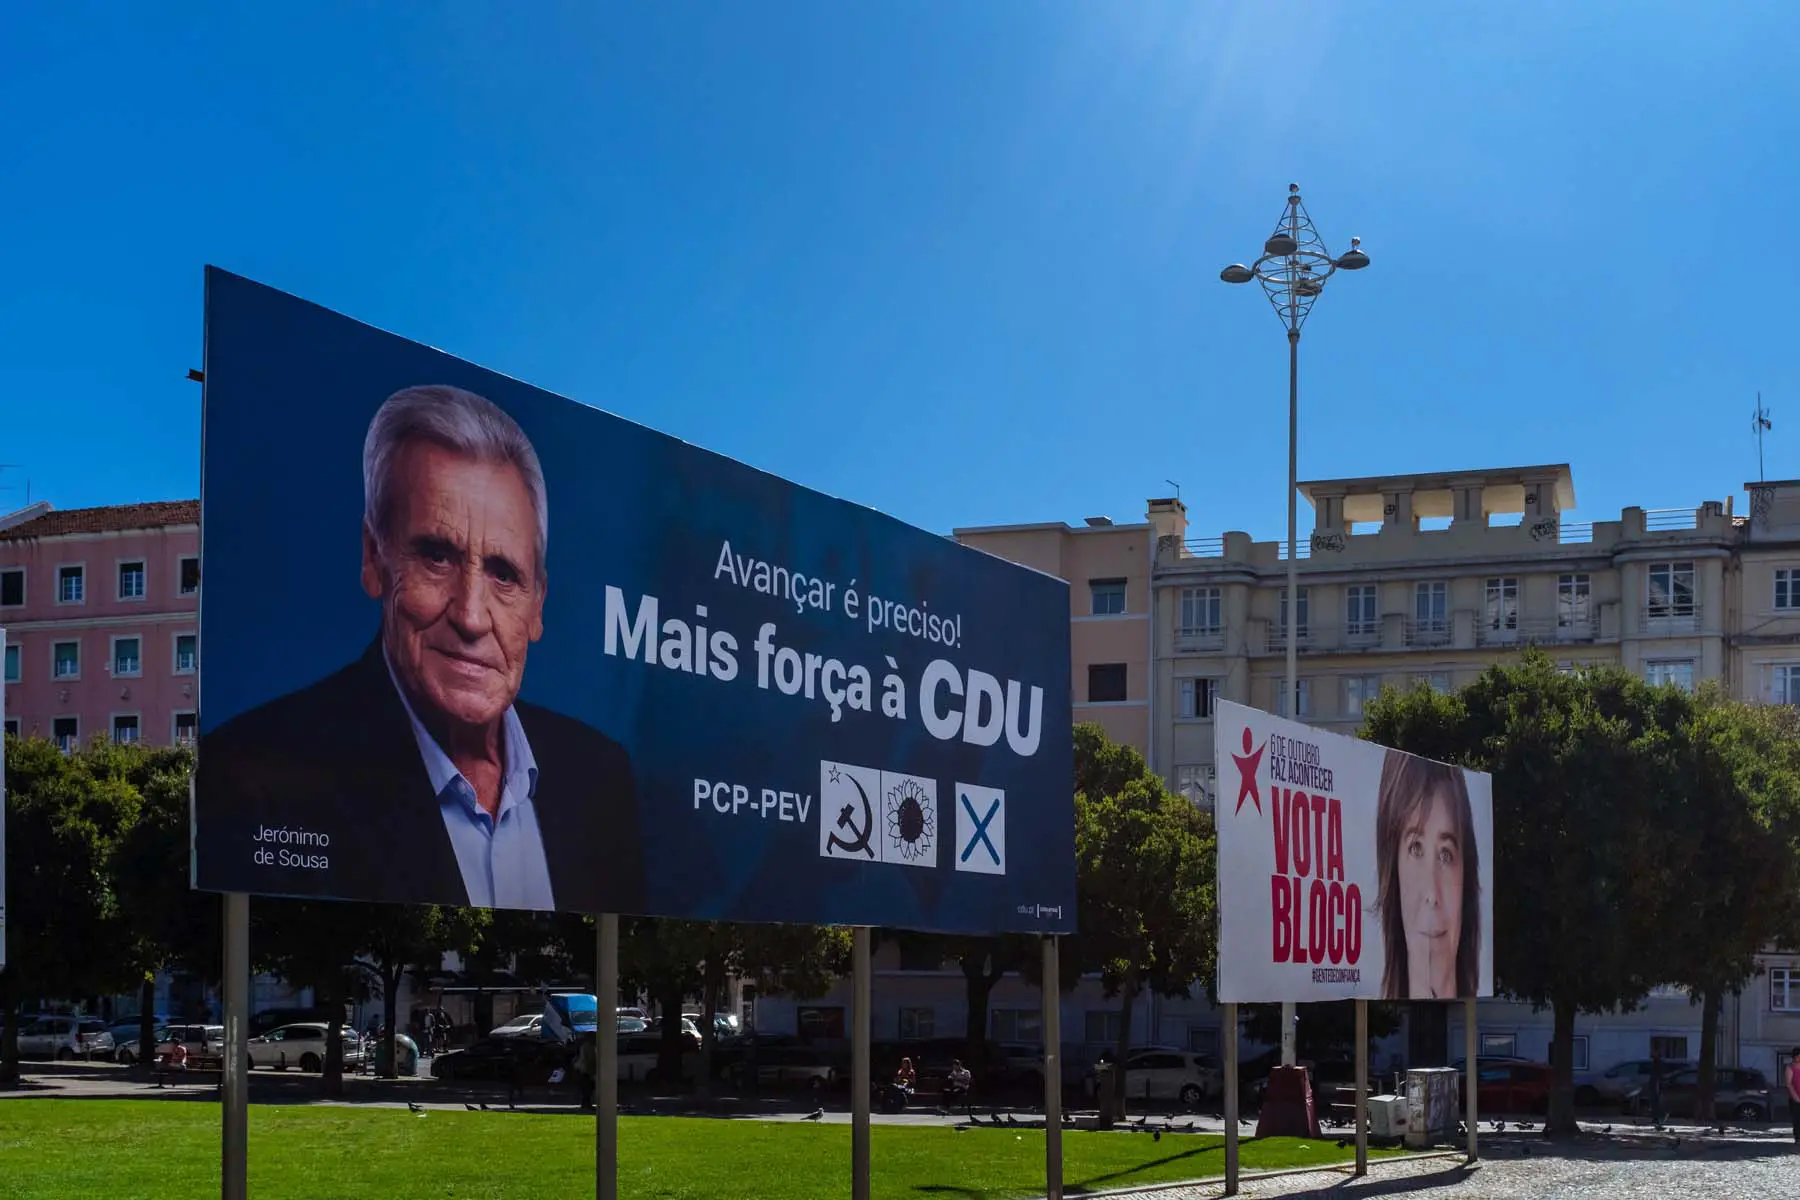 Portuguese election posters